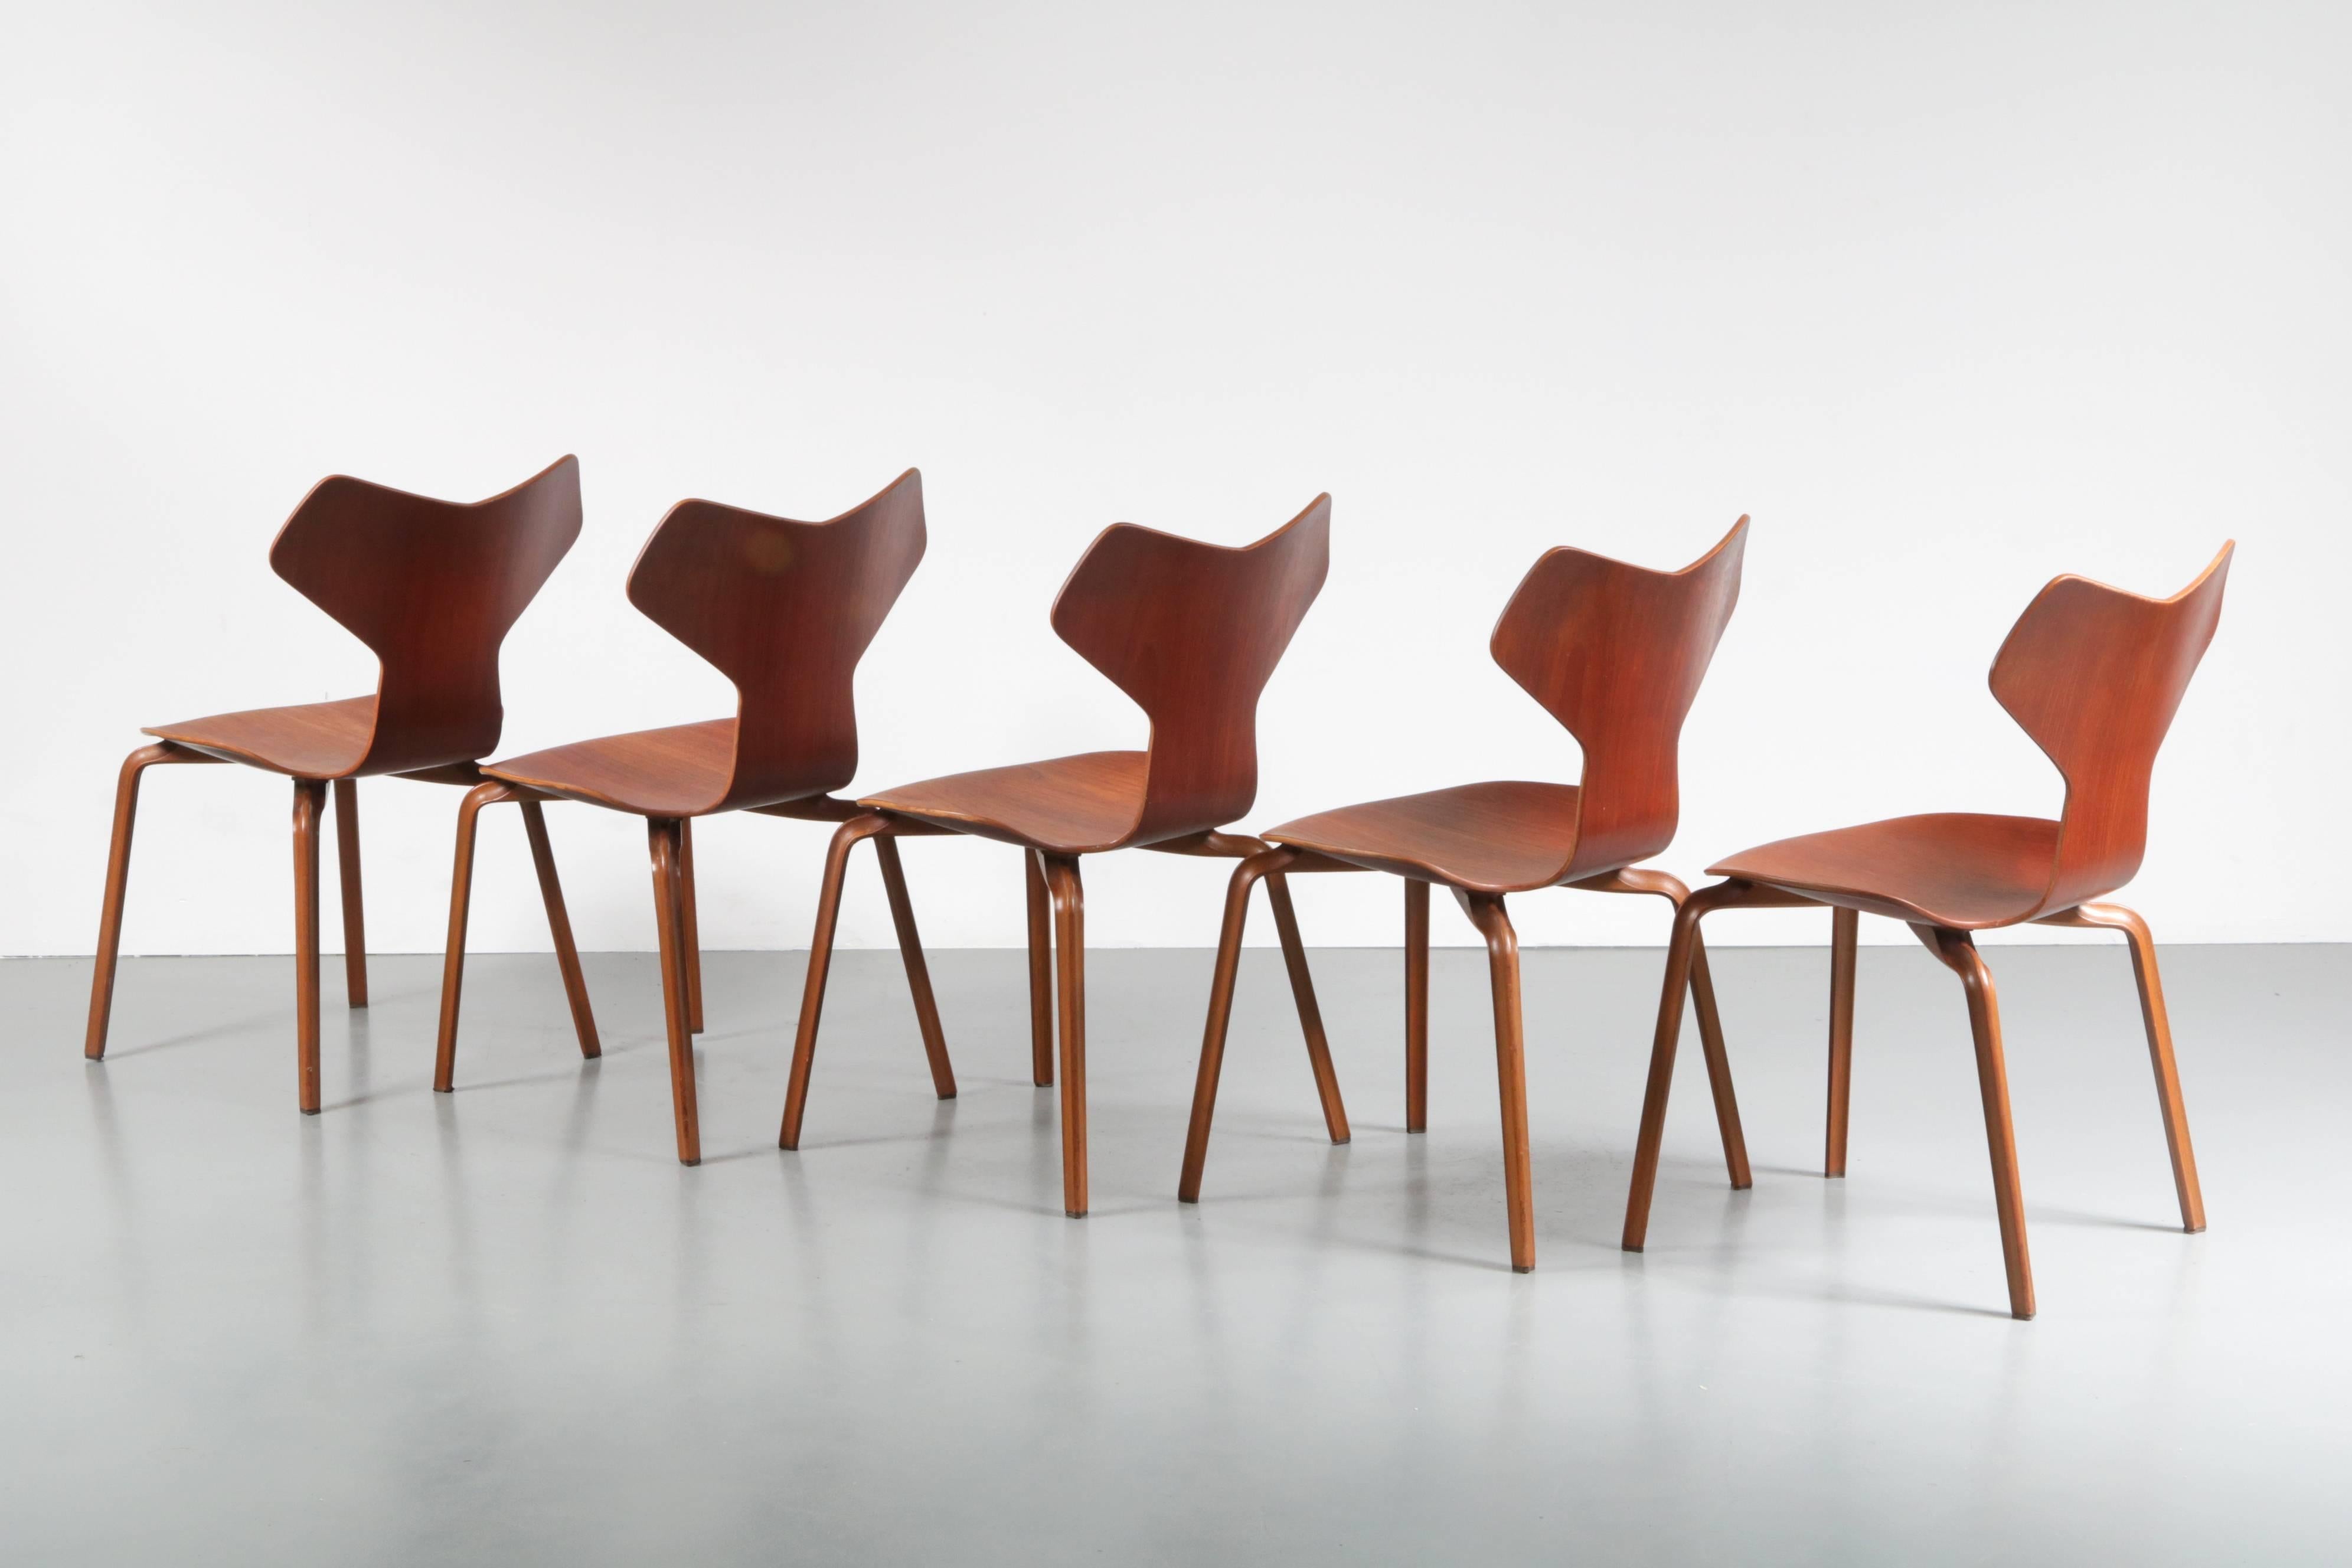 Beautiful set of five Grand Prix chairs (model 3130) designed by Arne Jacobsen, manufactured by Fritz Hansen in Denmark 1957.

The chairs are completely made of high quality teak wood, giving them a nice luxurious appearance. This model is named